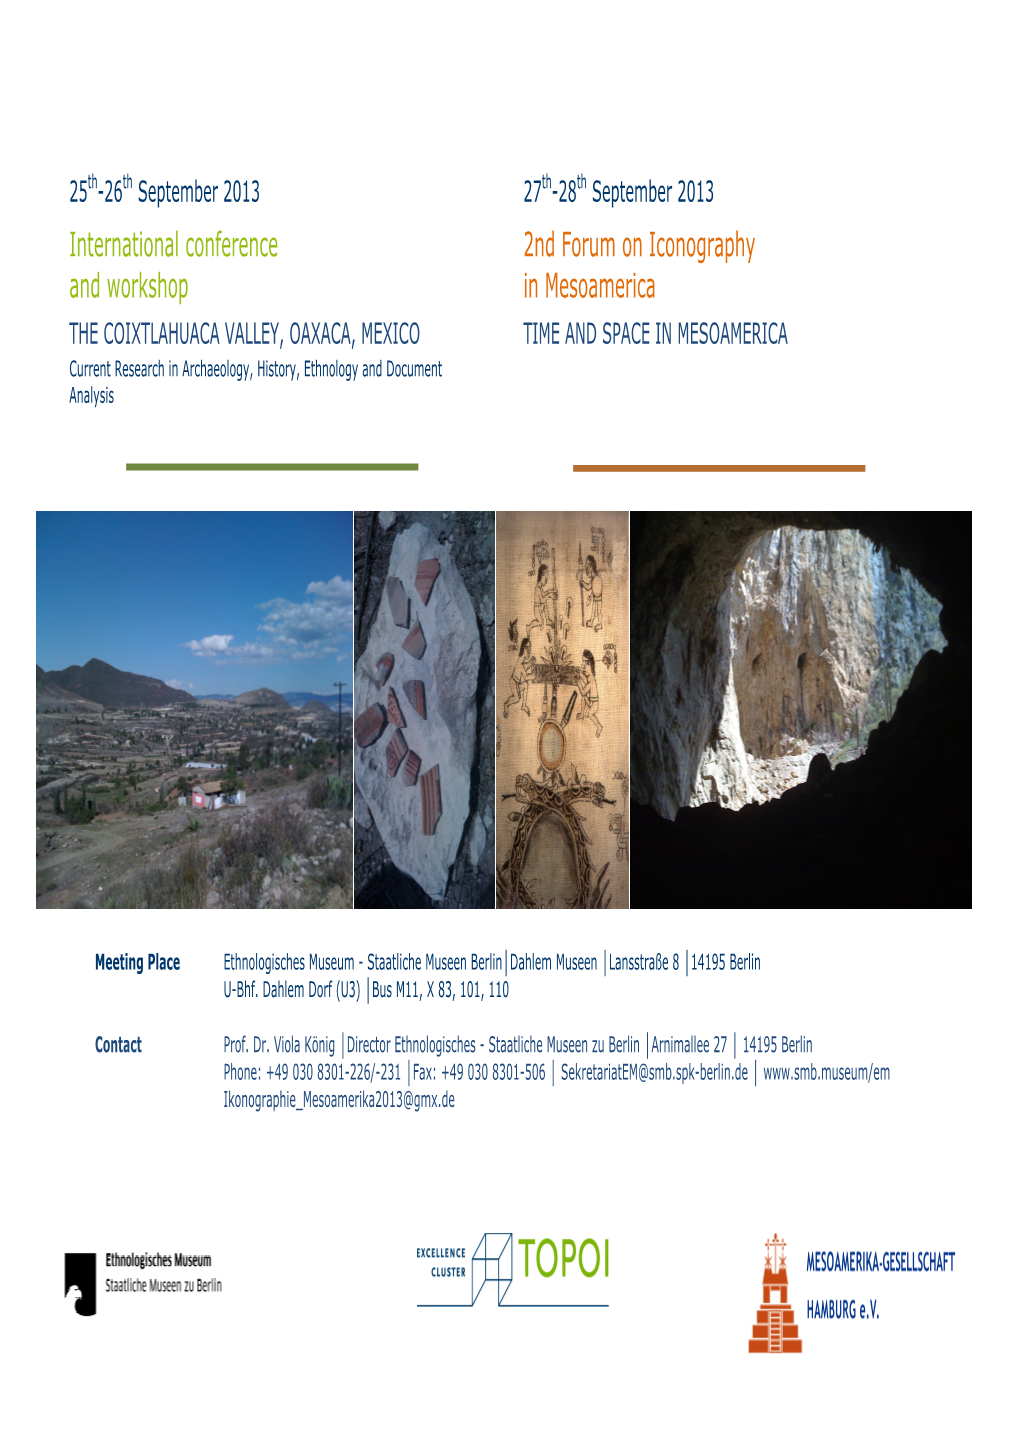 International Conference and Workshop the Coixtlahuaca Valley